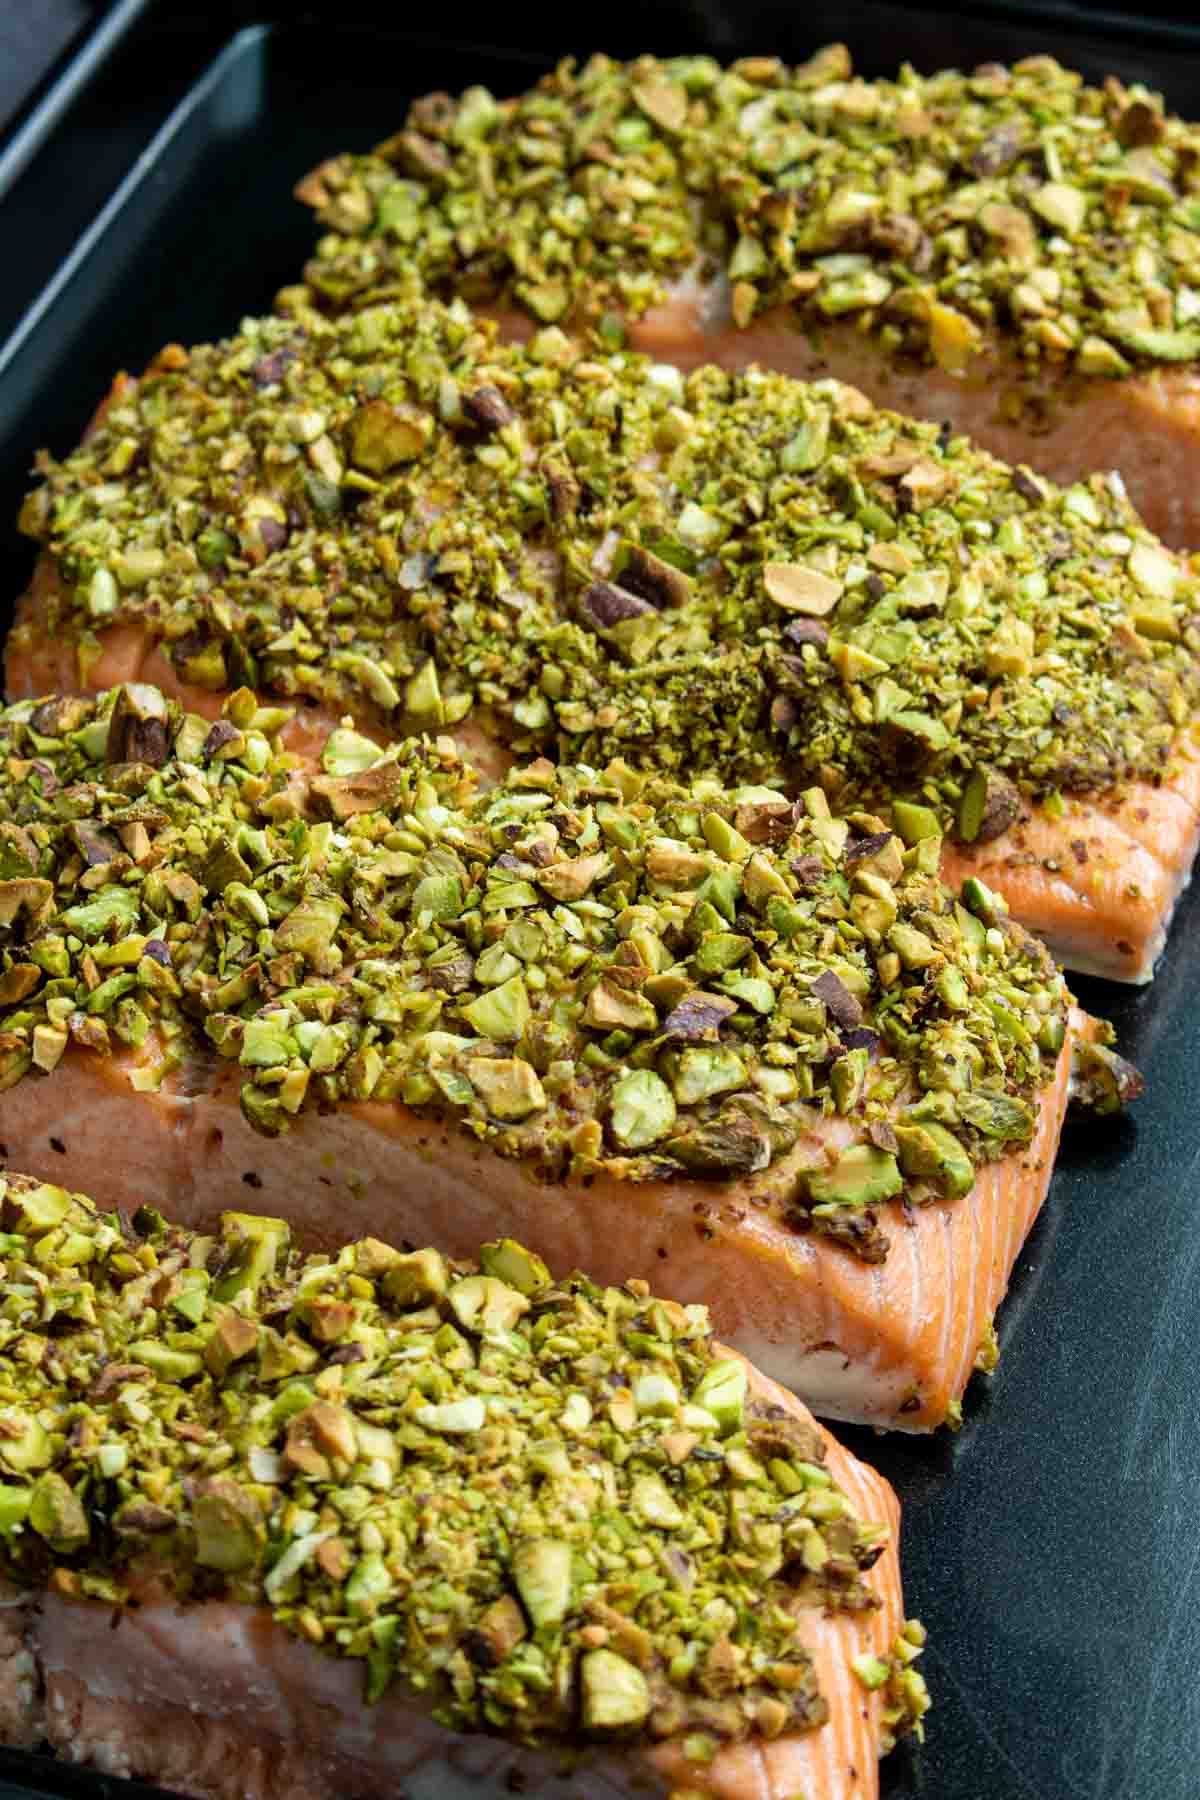 Pistachio crusted salmon roasted in the oven